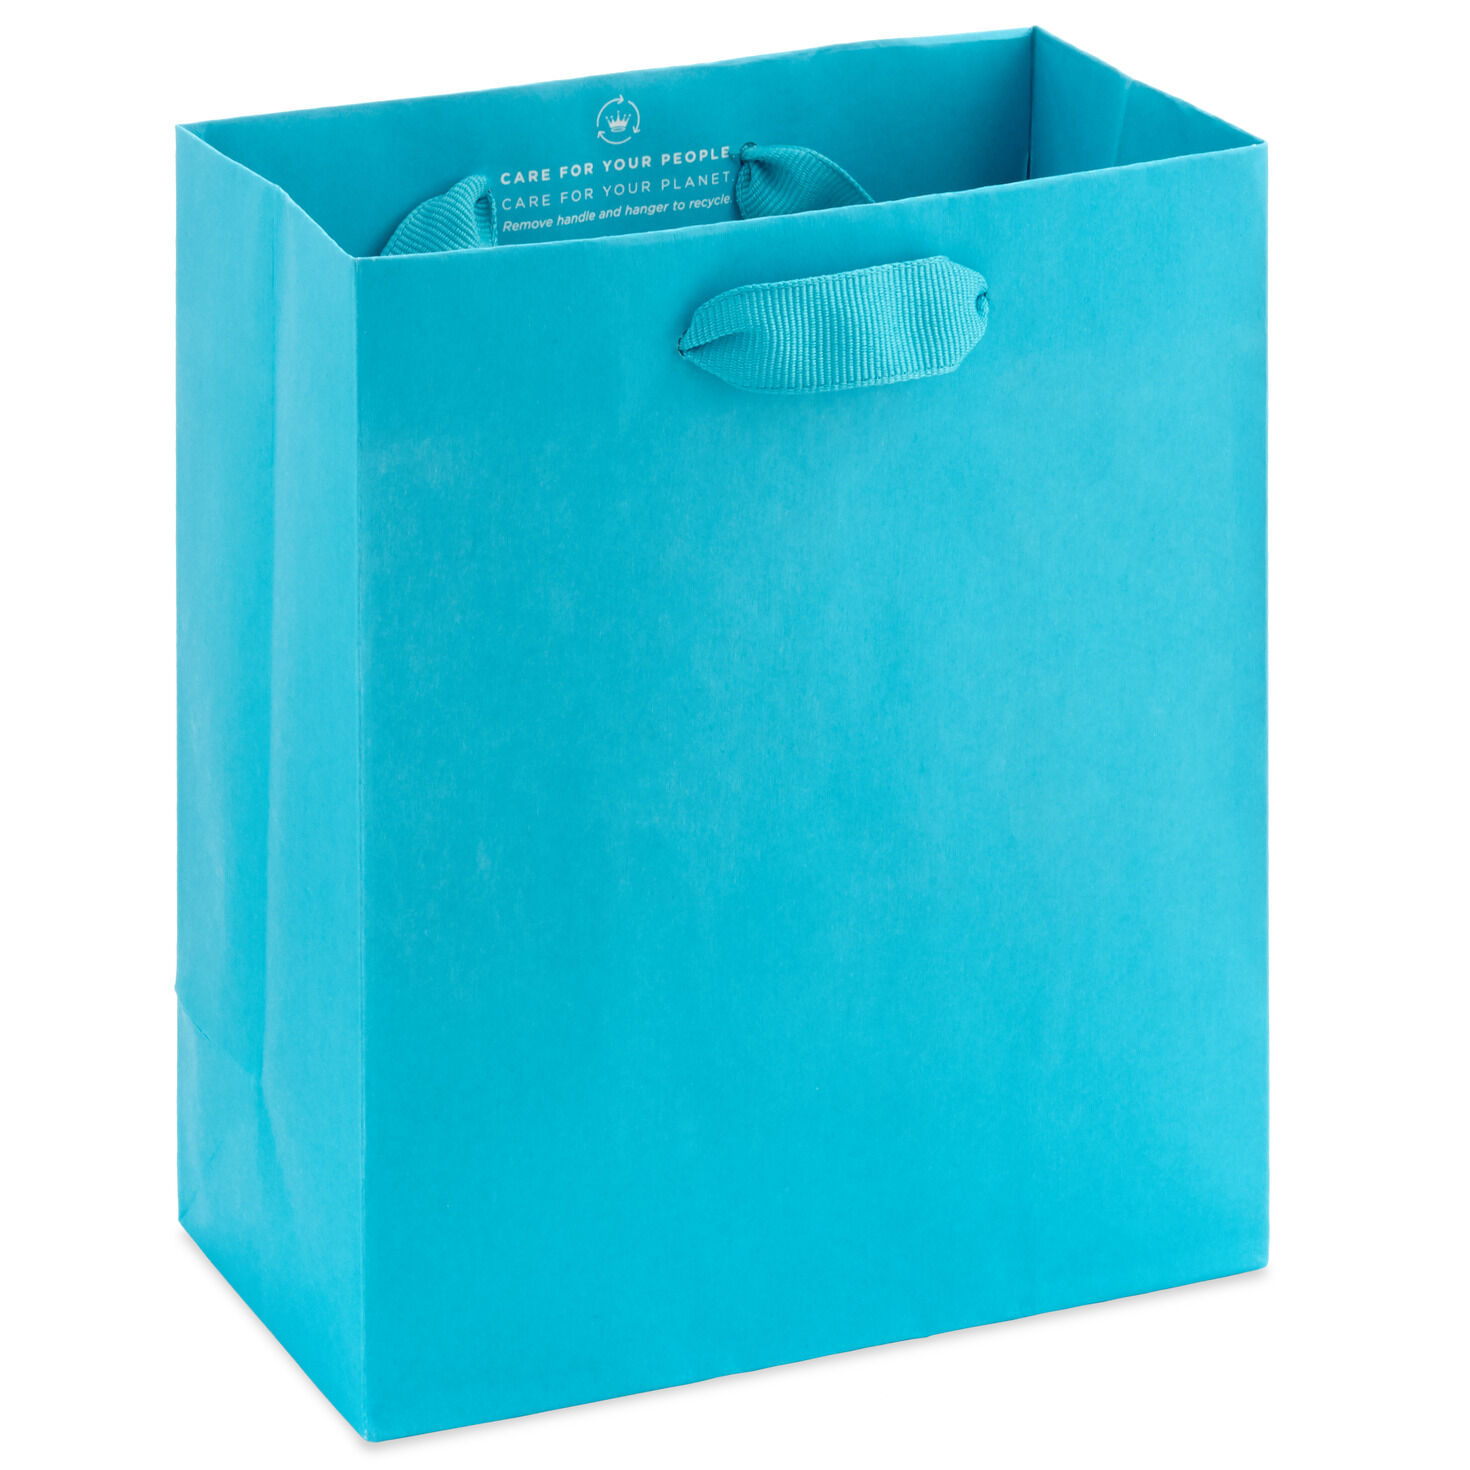 Details about   500pc Jewelry Gift Bags Teal Gift Bags Paper Merchandise Bags Chevron Teal Bag 